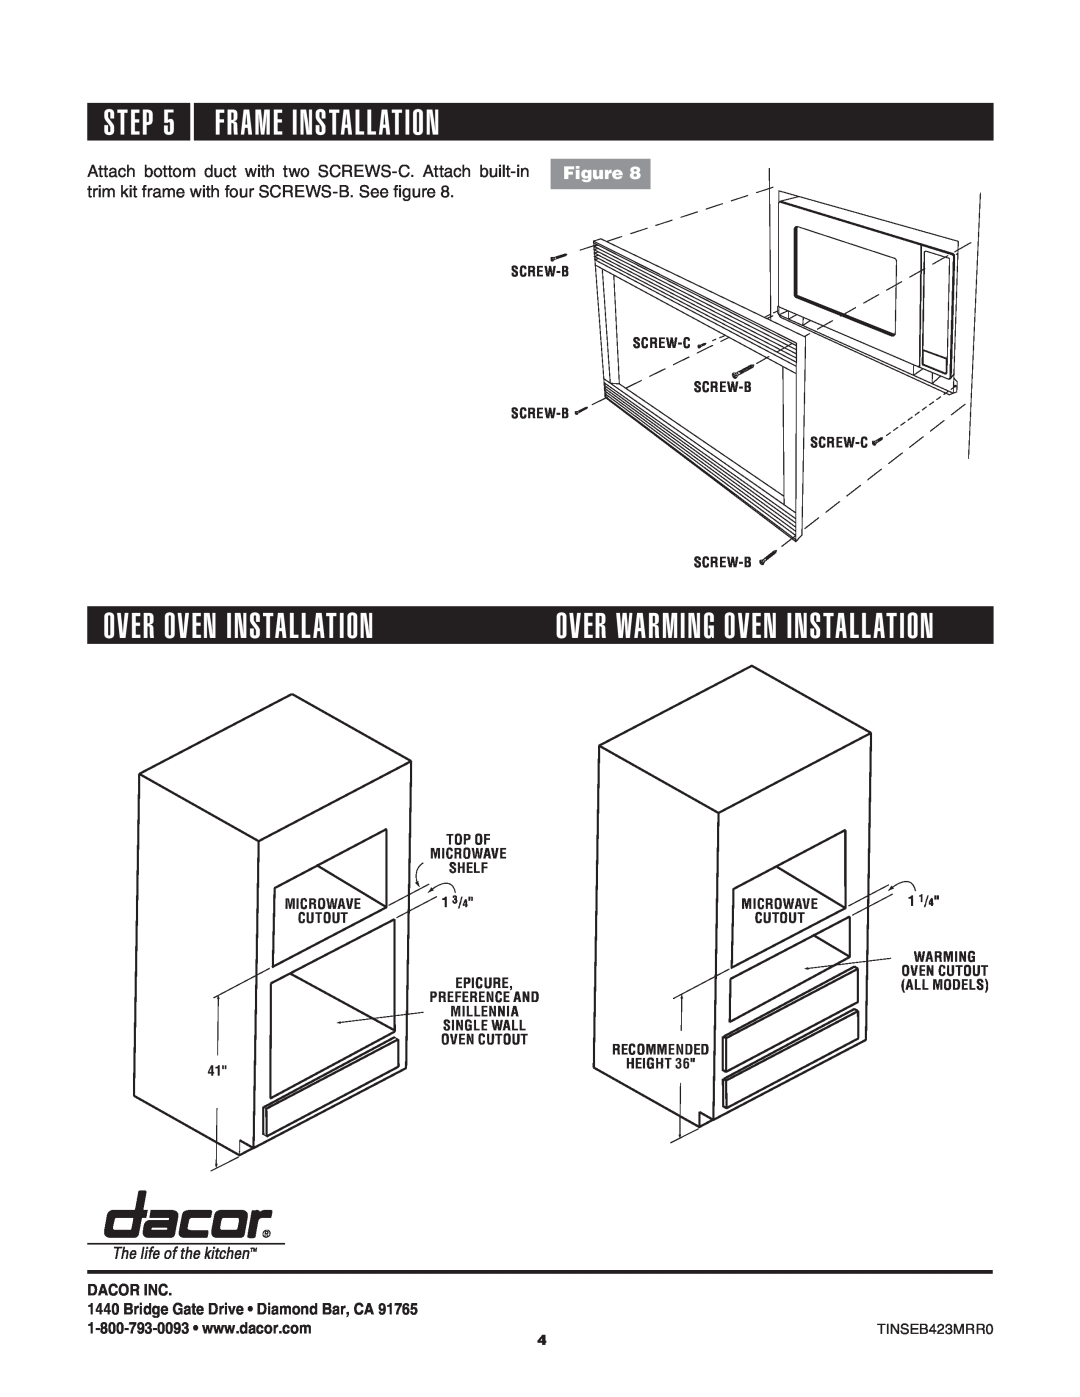 Dacor AOCTK27 Frame Installation, Over Oven Installation, Over Warming Oven Installation, Dacor Inc, Screw-B, Microwave 